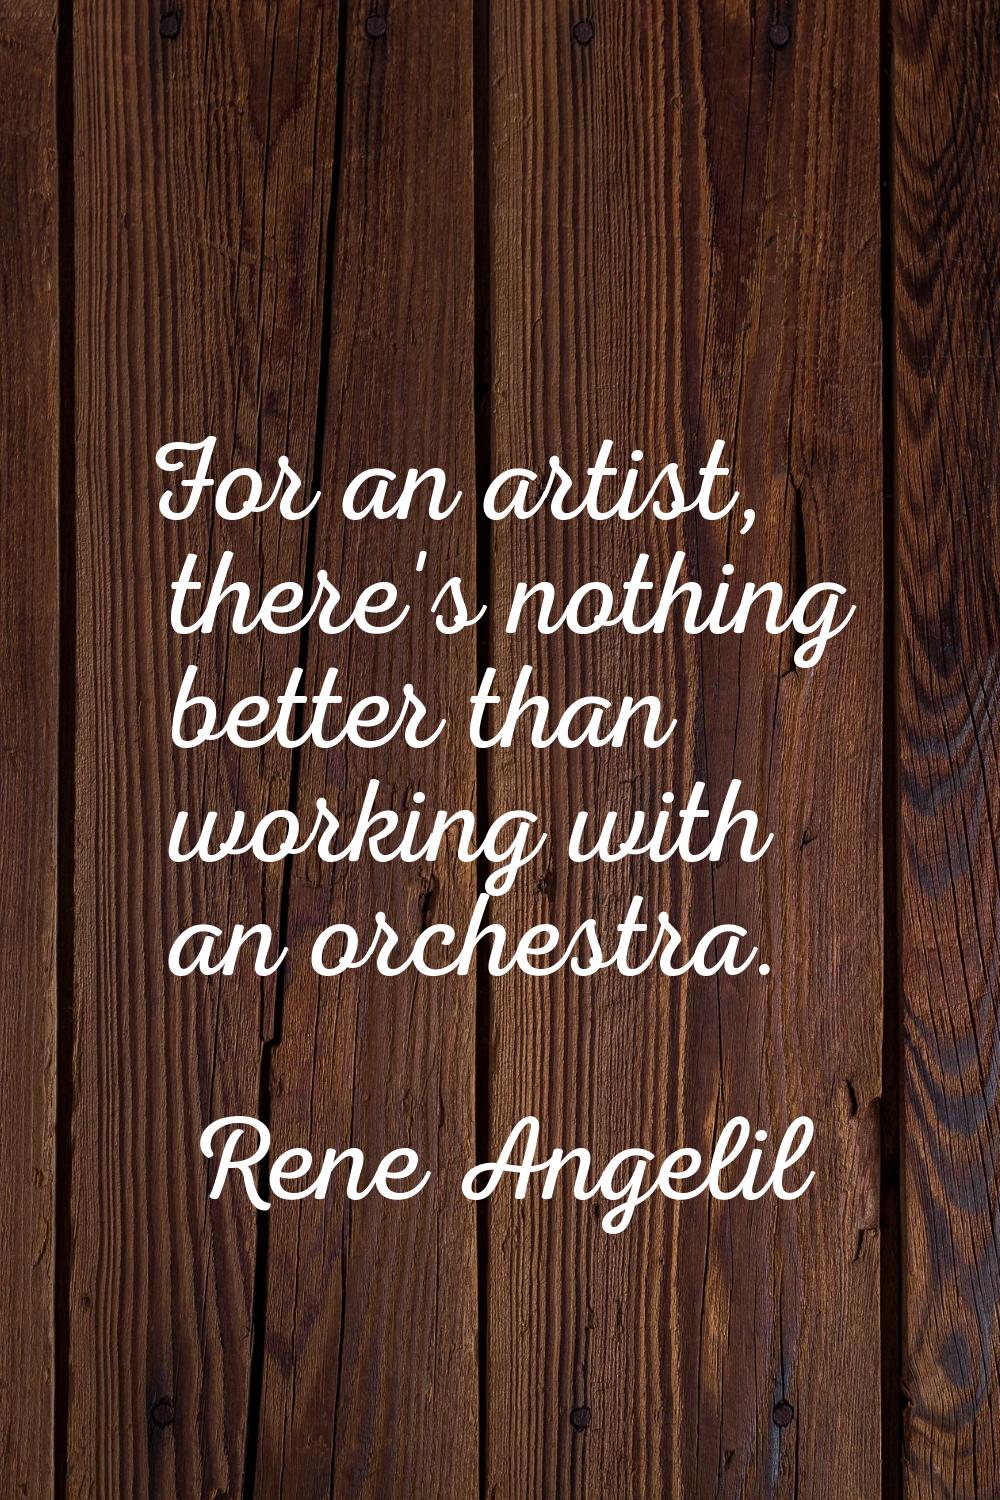 For an artist, there's nothing better than working with an orchestra.